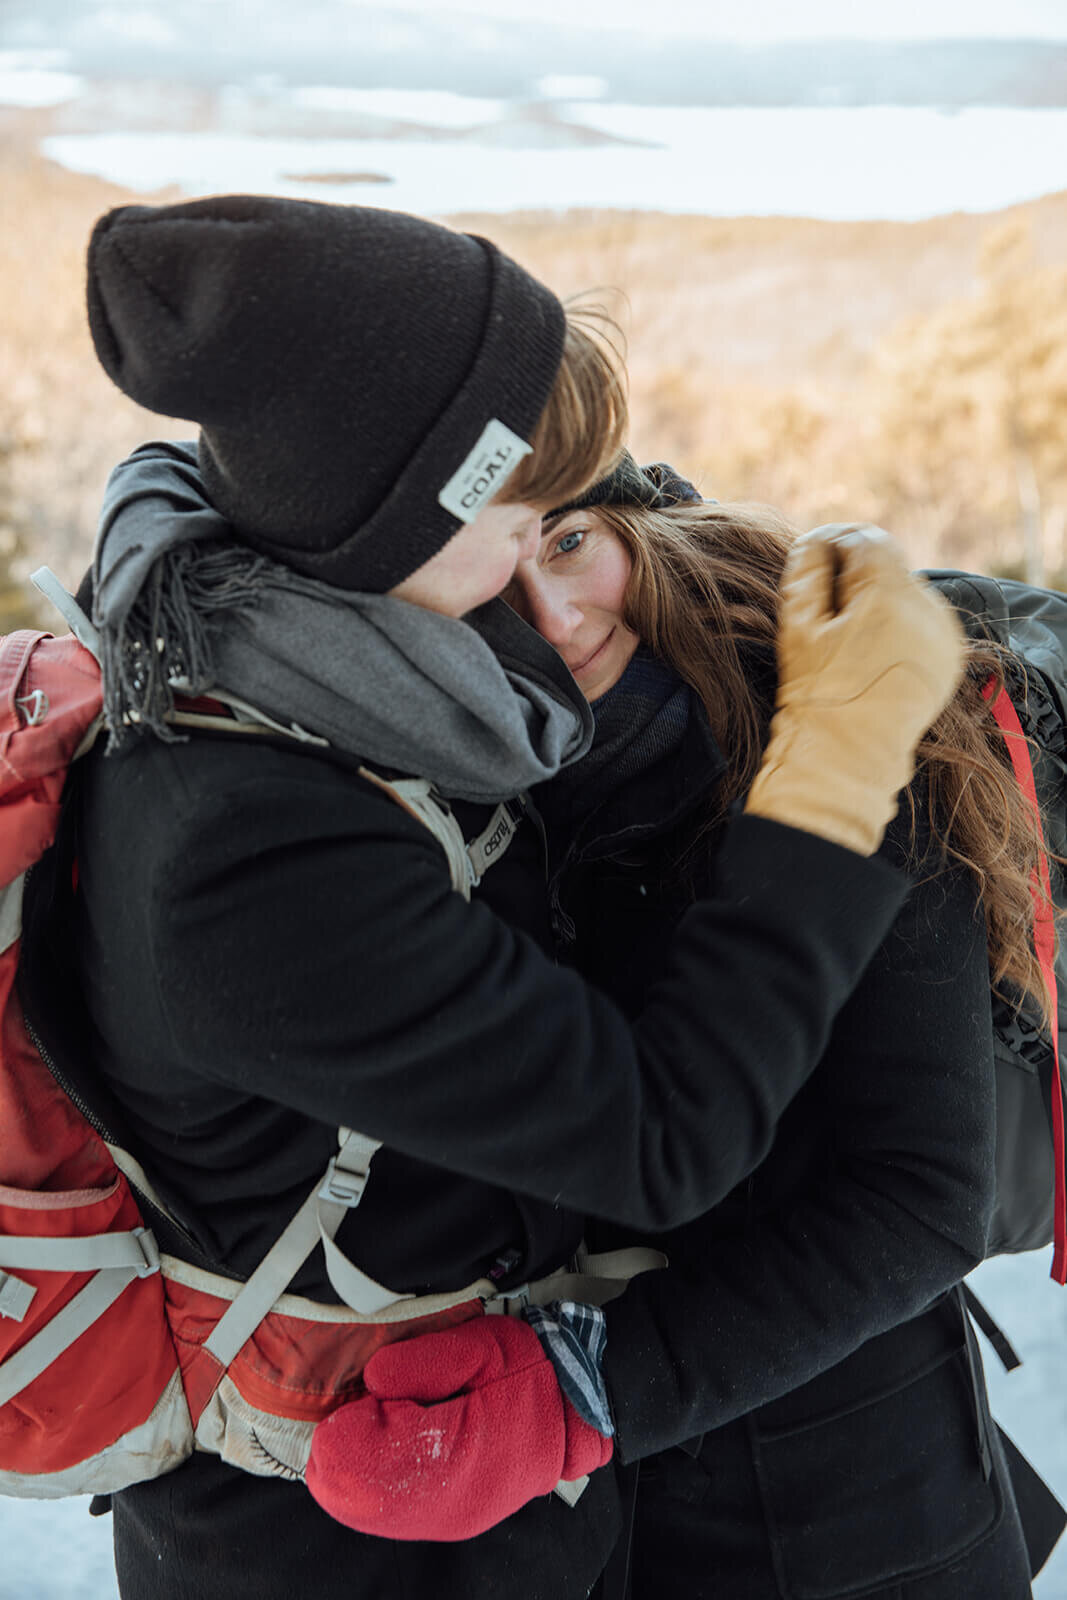   Couple cold on the summit of Mt. Major in New Hampshire in the winter for their anniversary. New Hampshire couples photographer  